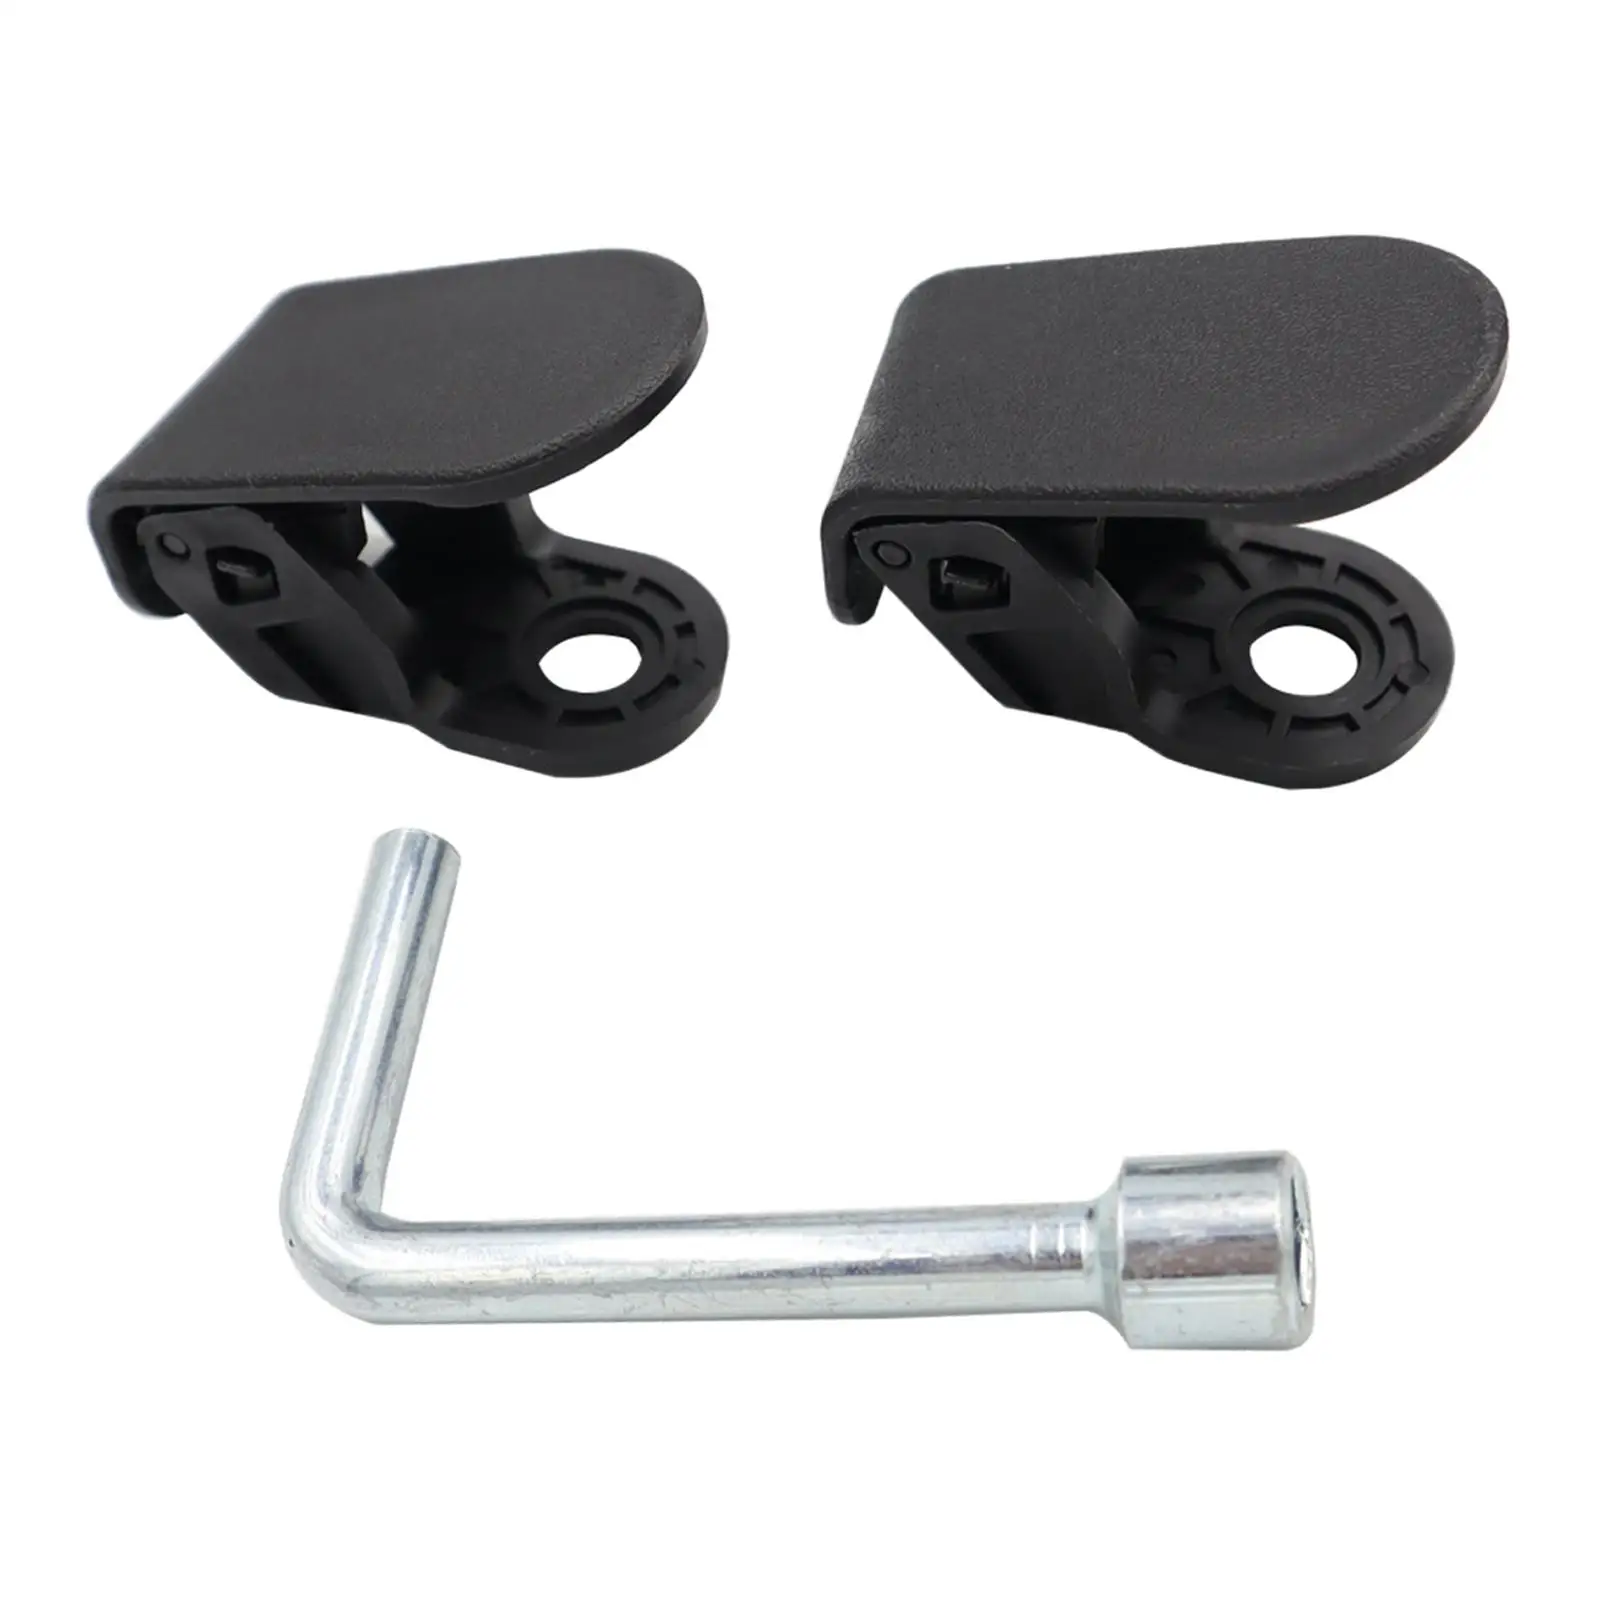 2Pcs Front Trunk Hook with Wrench Grocery Bag Hook Hanger for Tesla Model 3 2019 2020 Car Accessories Stable Performance